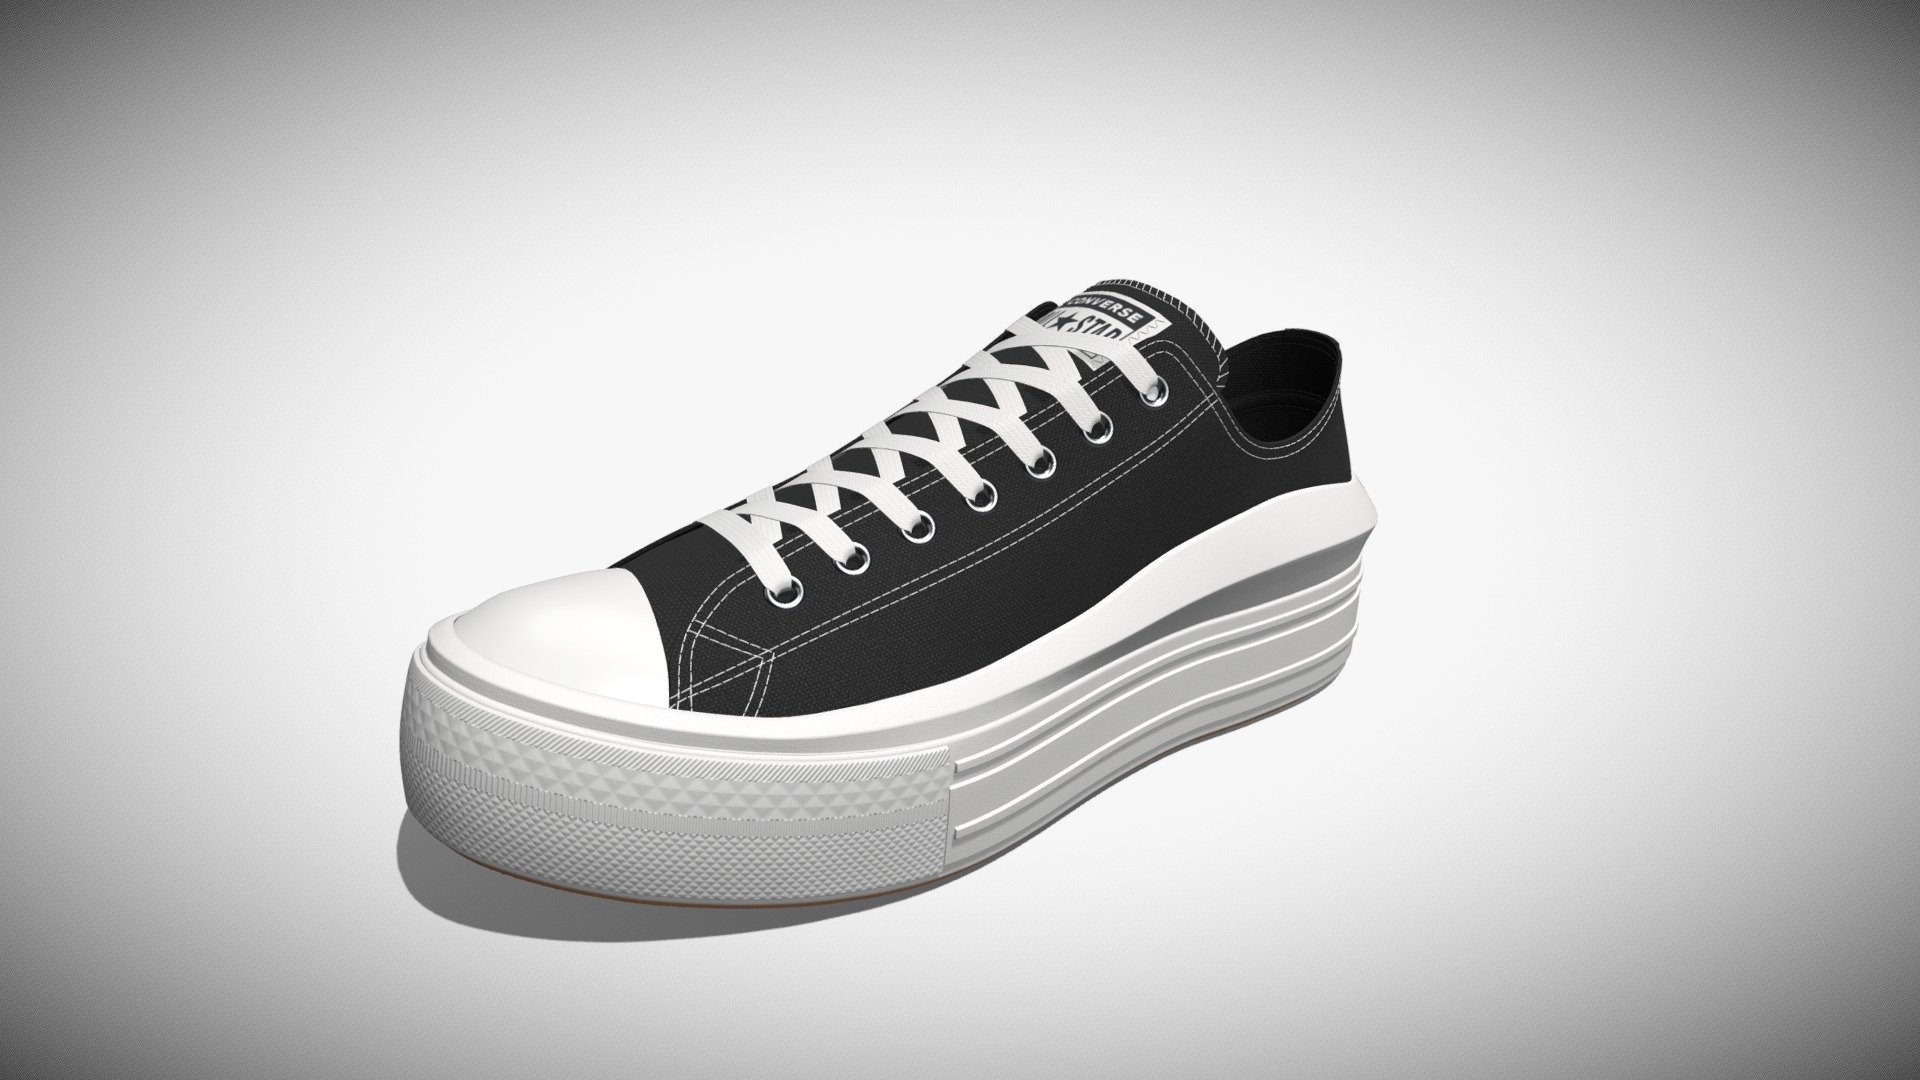 Detailed 3D model of a pair of Black Chuck Taylor All Star Move Platform Low Top sneakers, modeled in Cinema 4D. The model was created using approximate real world dimensions.

The model has 379,304 polys and 396,004 vertices.

An additional file has been provided containing the original Cinema 4D project file with both standard and v-ray materials, textures and other 3d format such as 3ds, fbx and obj. These files contain both the left and right pair of the shoes 3d model